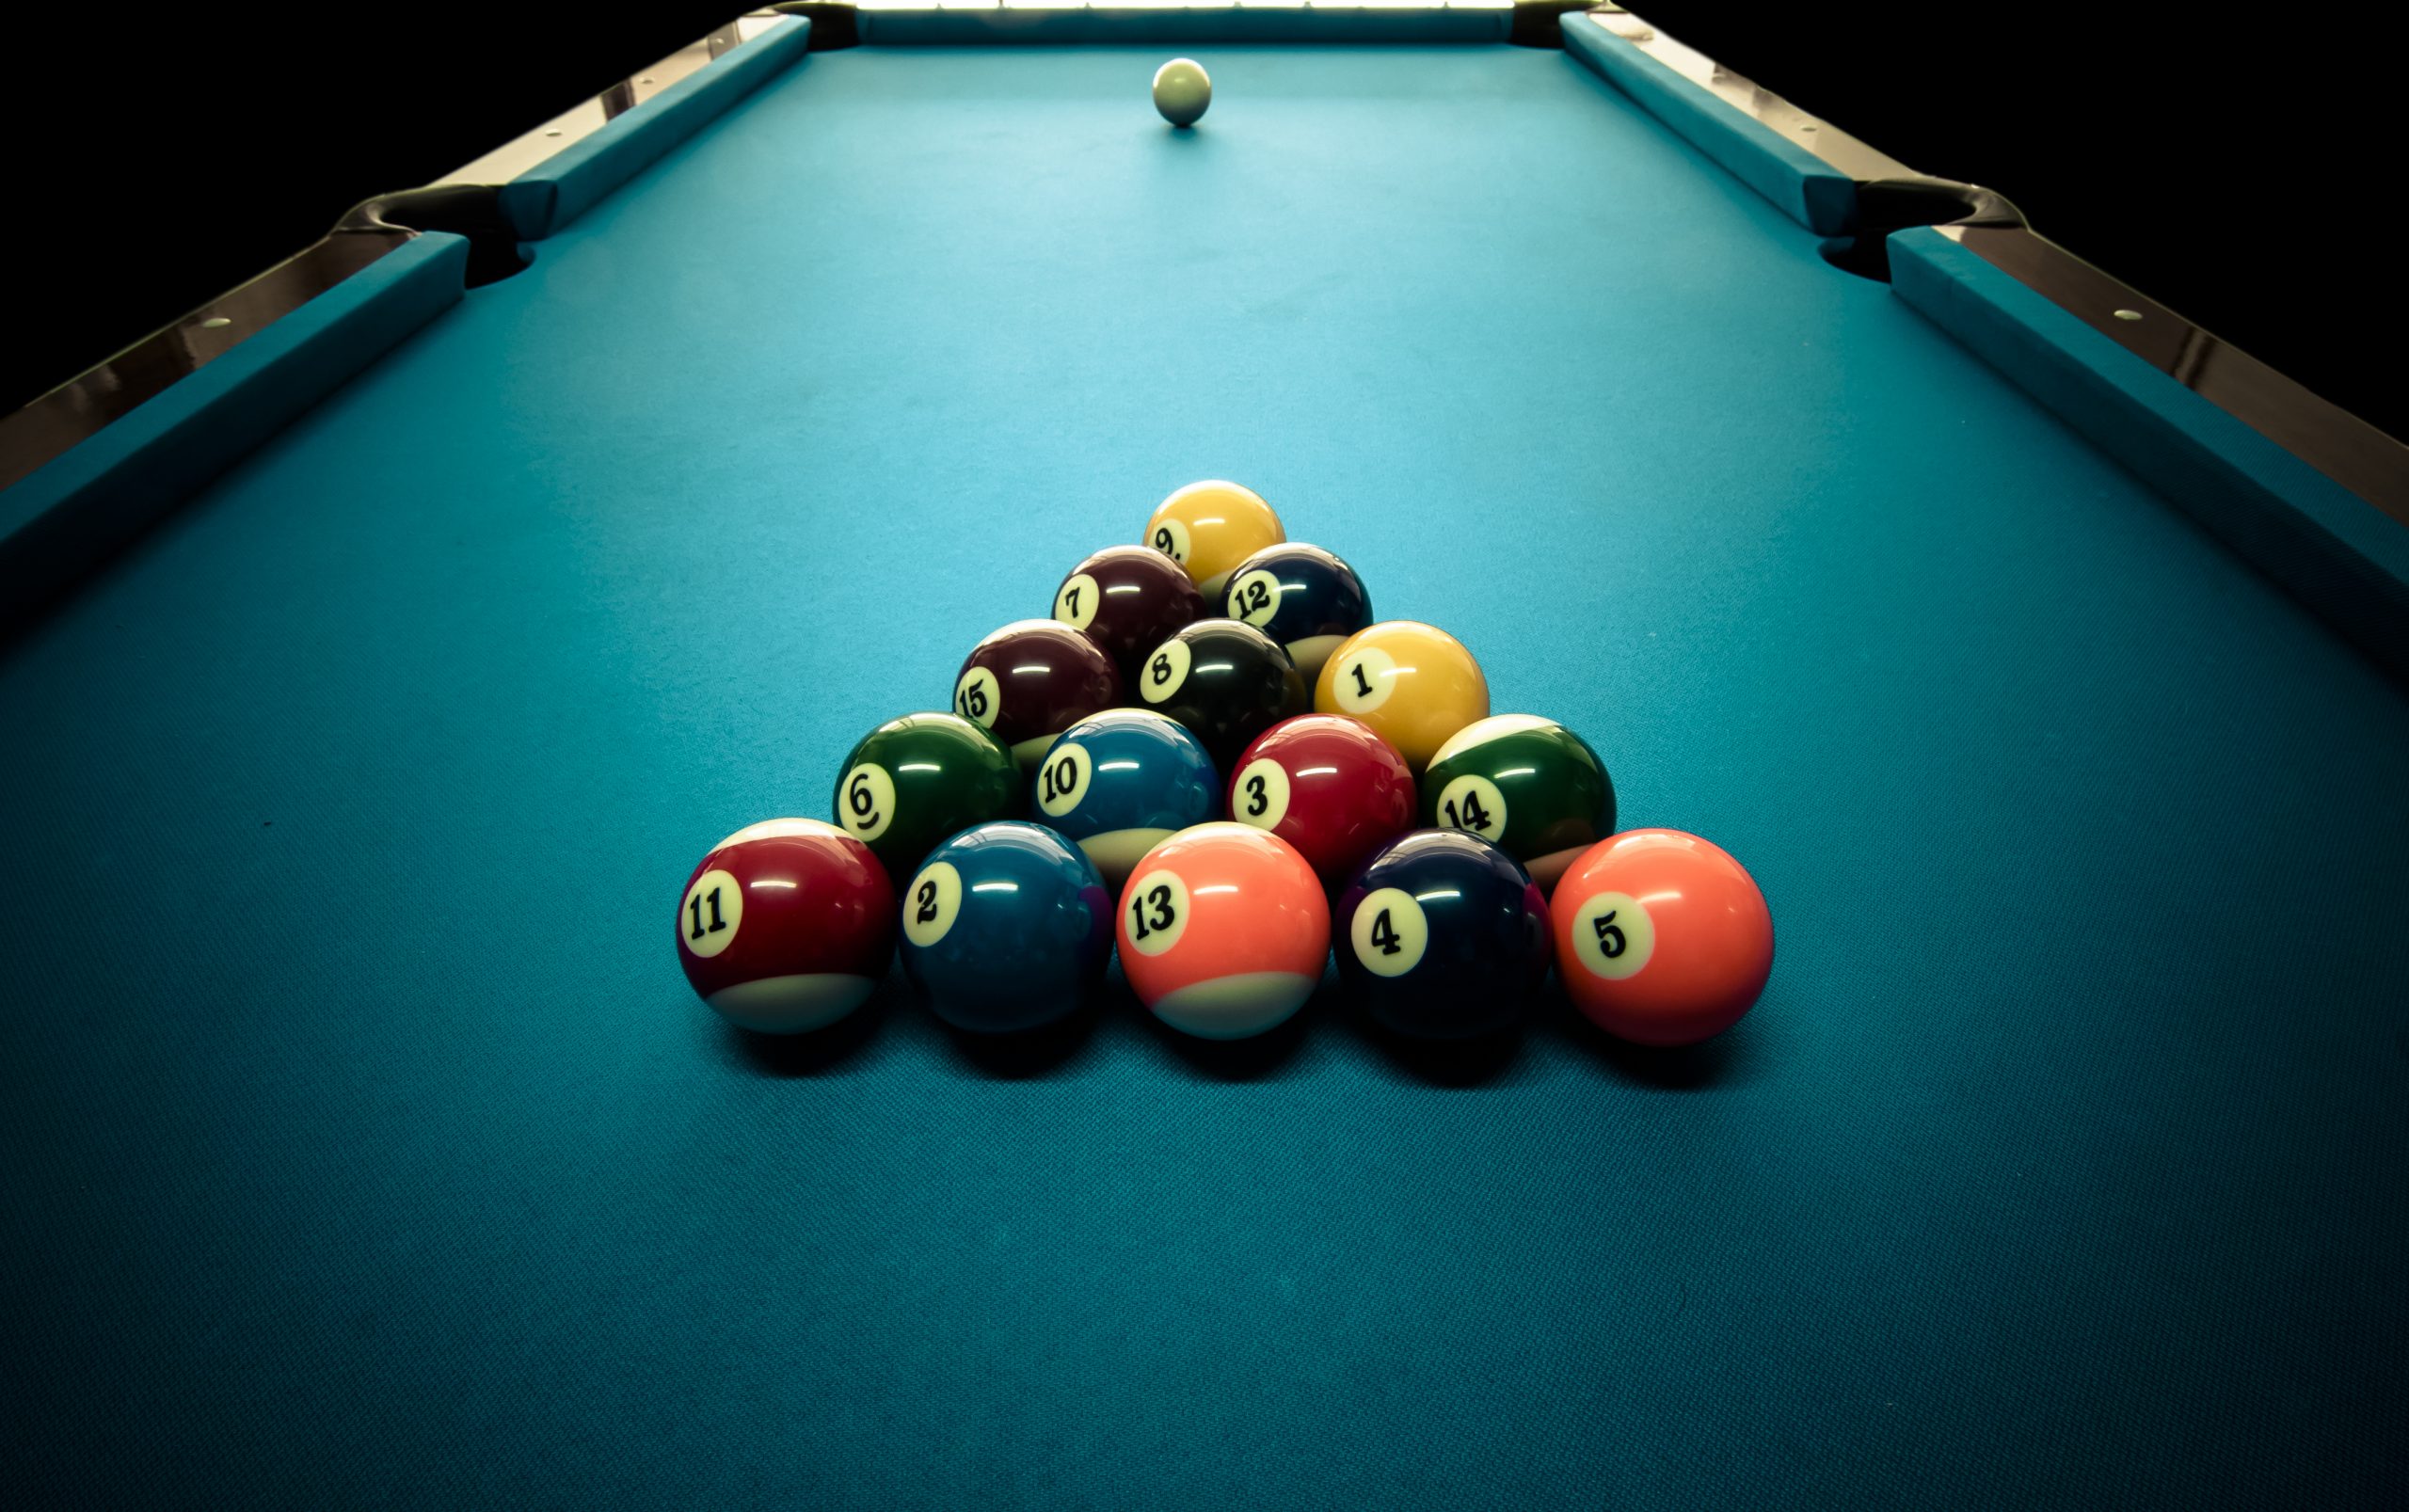 9 ball pool games free online play